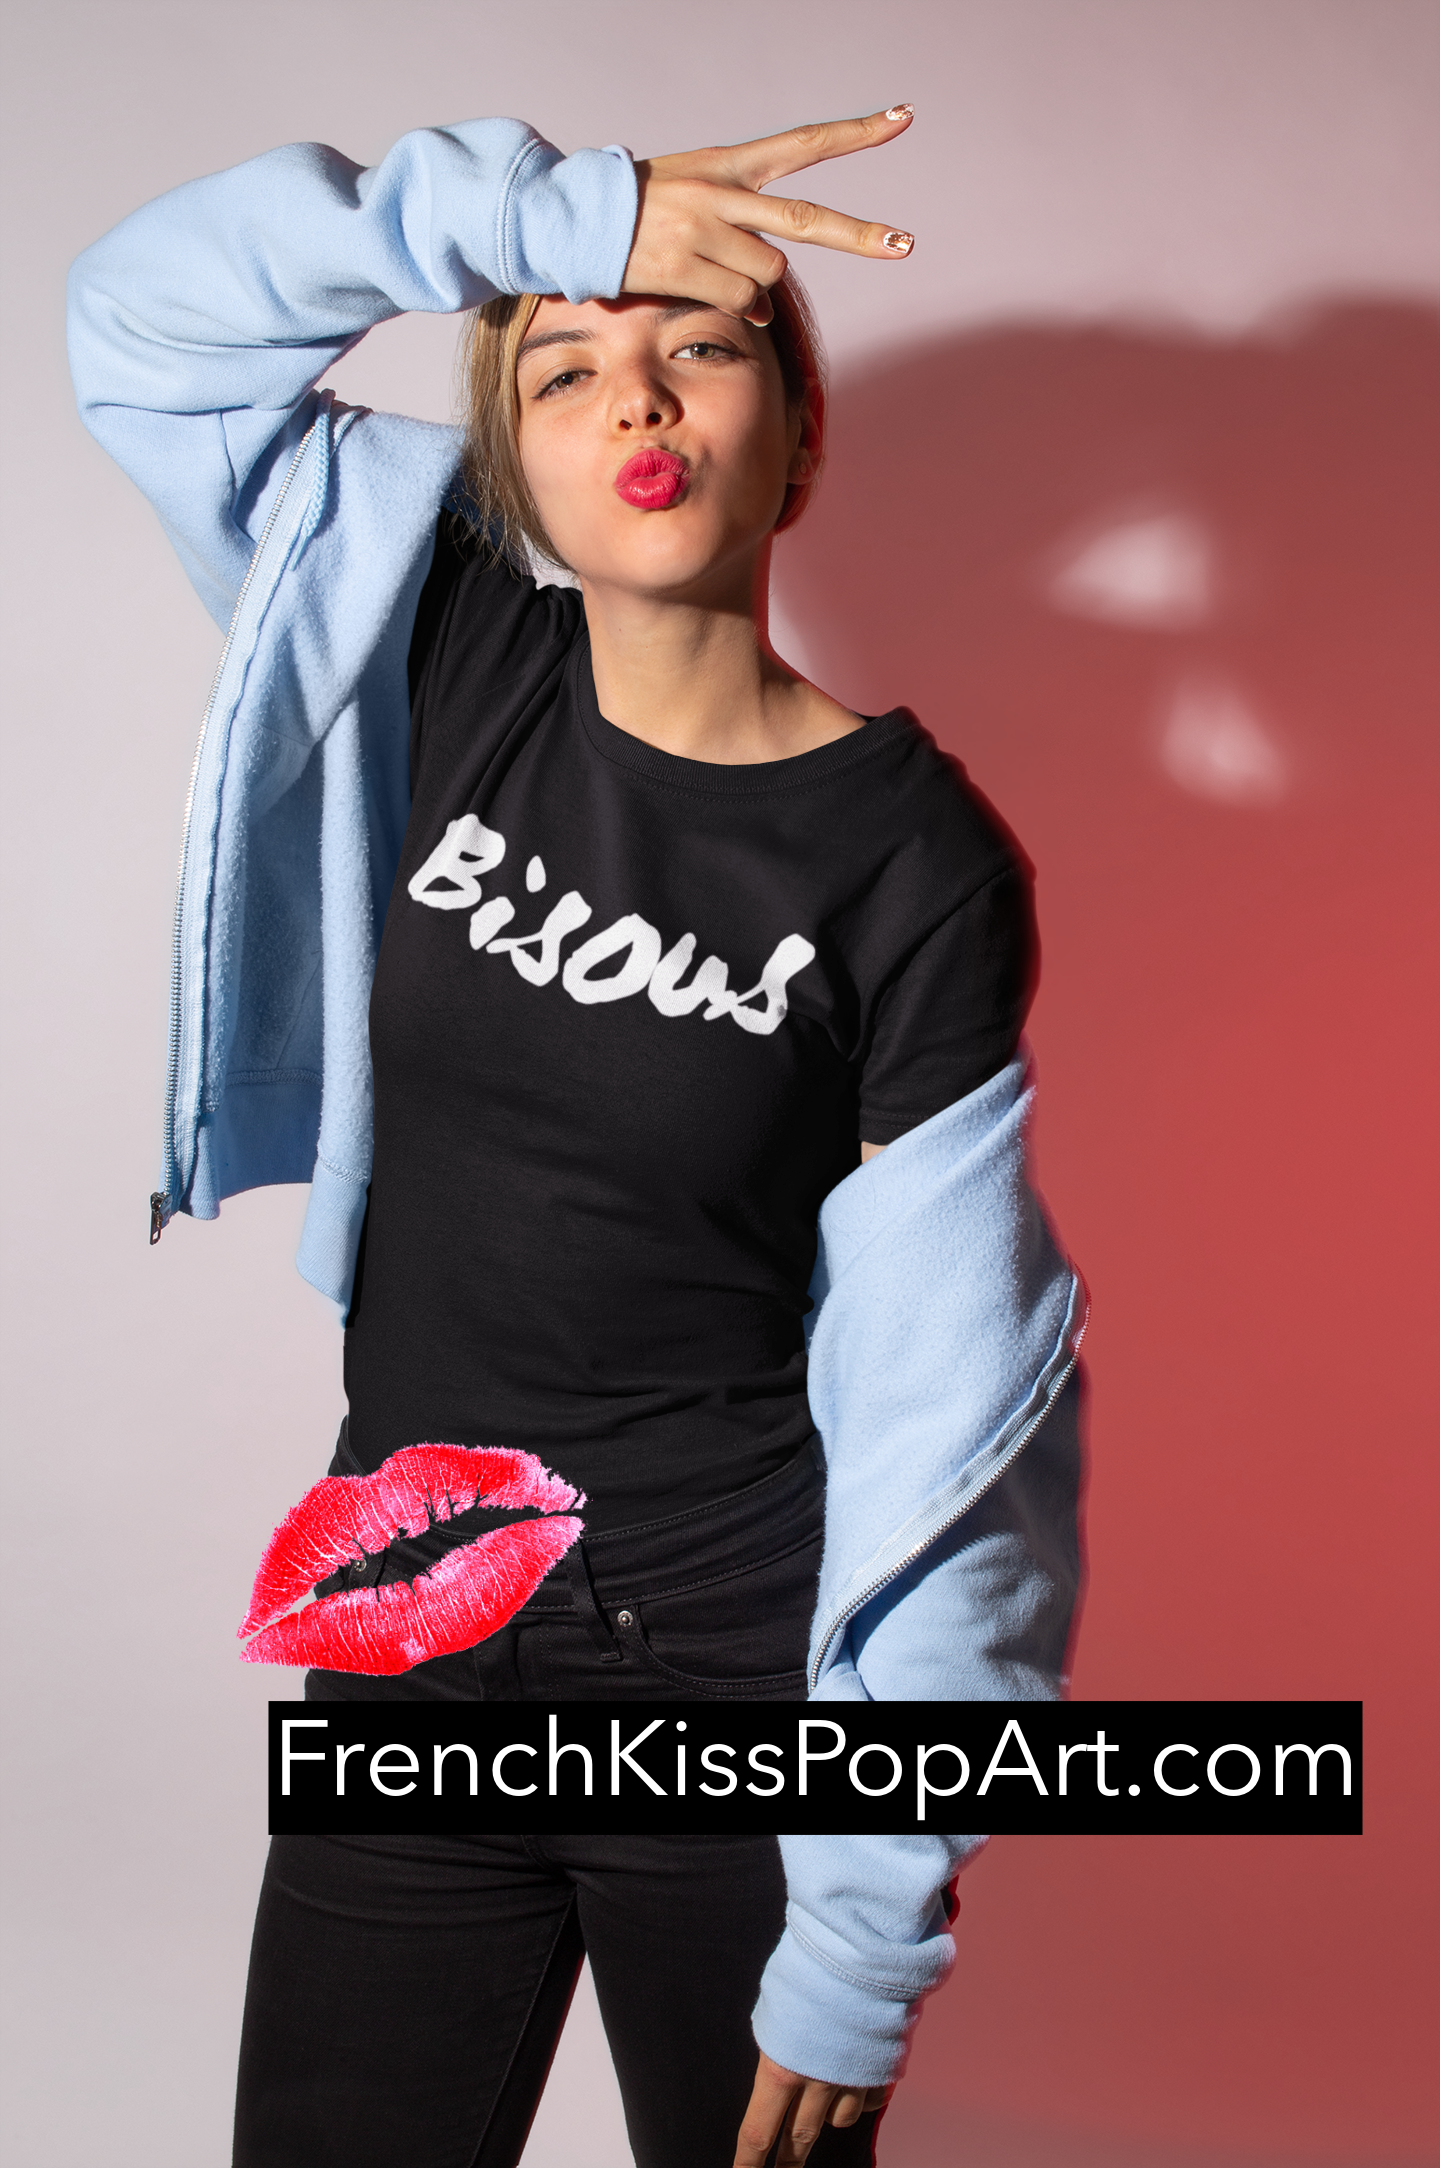 BISOUS BISOUS BISOUS chic fitted travel t-shirt, france, couture, french, provence, fashion, Women's short sleeve t-shirt